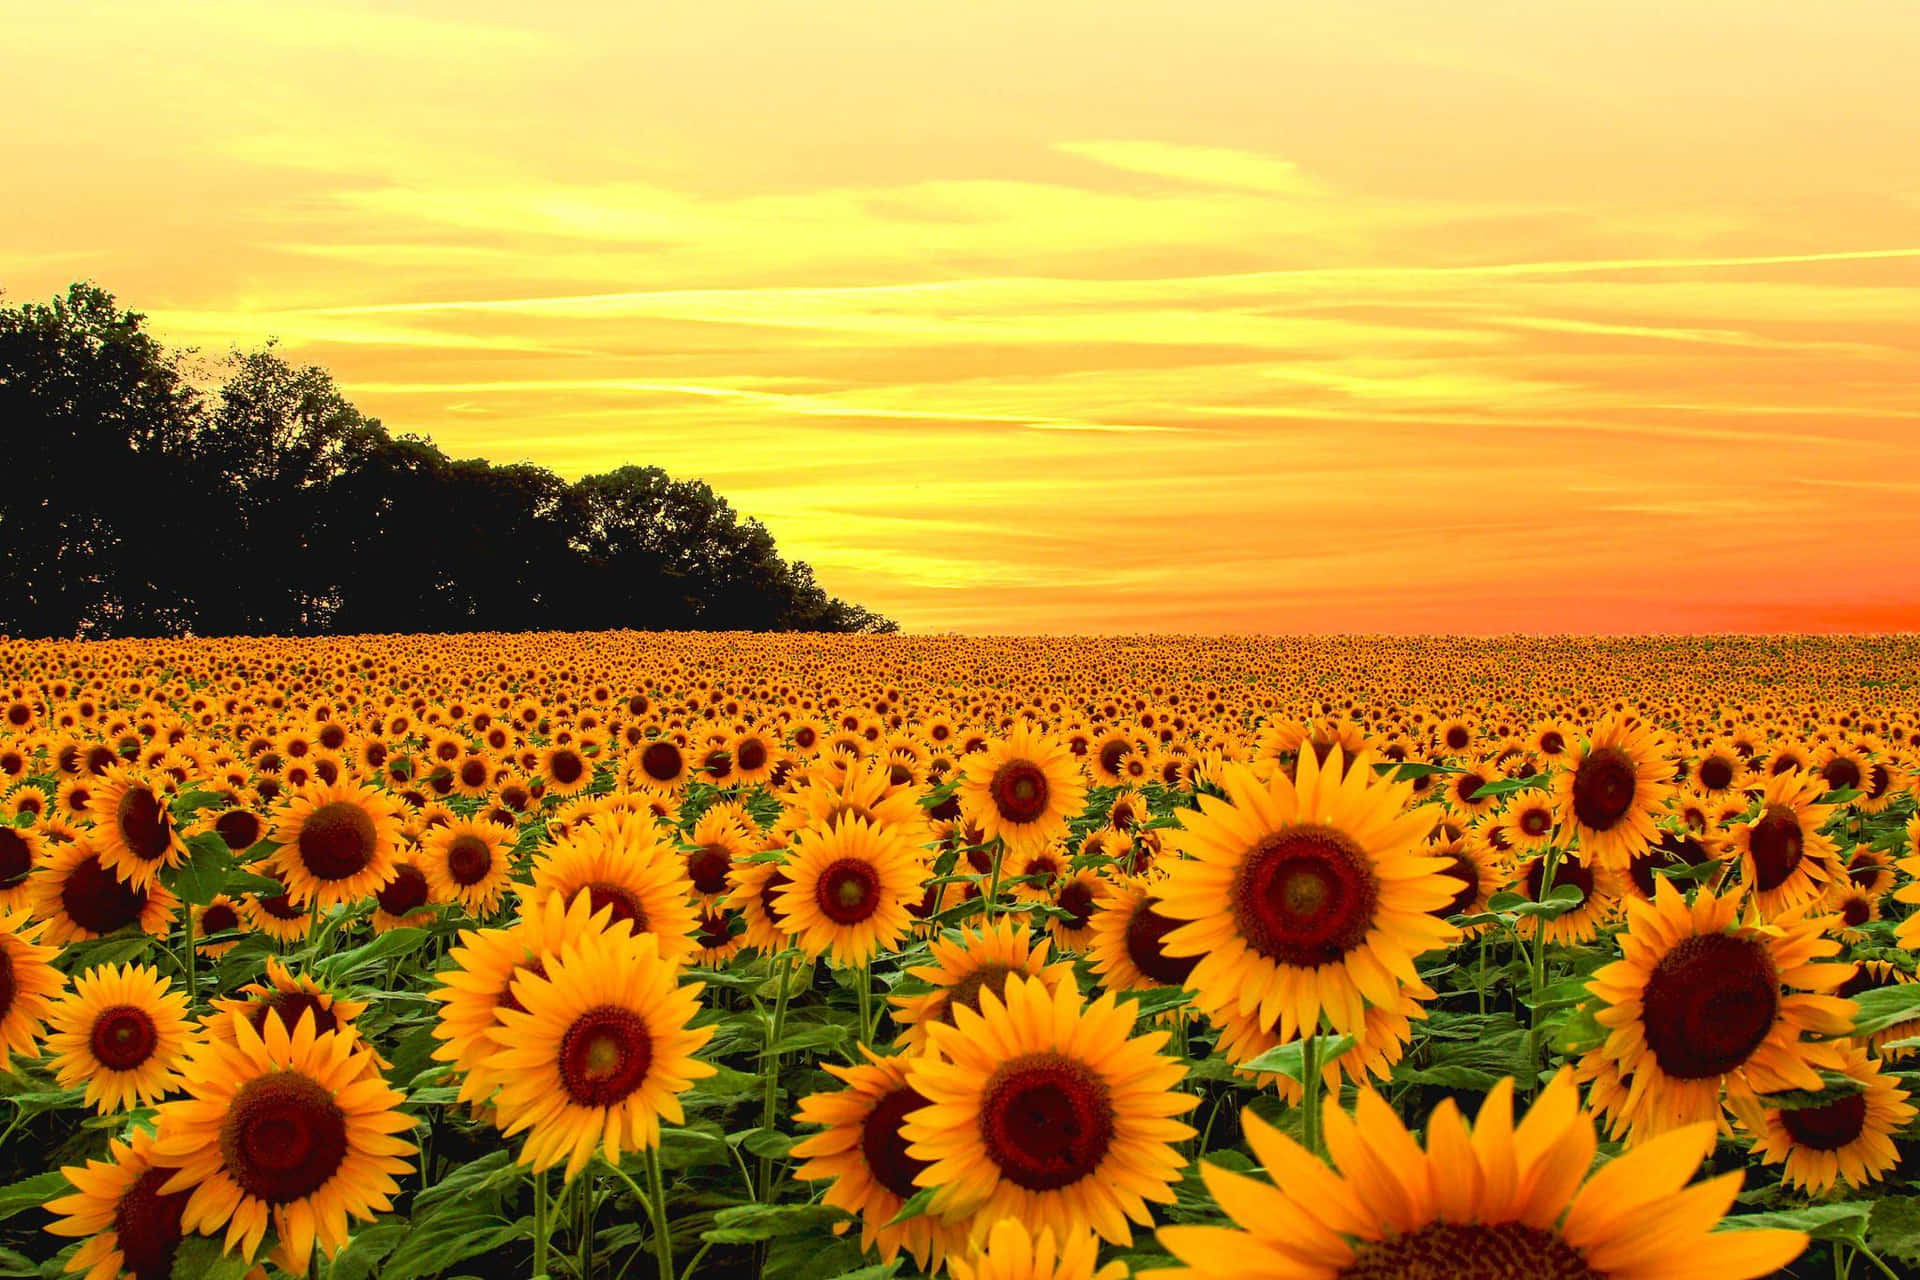 A bright yellow sunflower brings brightness and joy to the world. Wallpaper